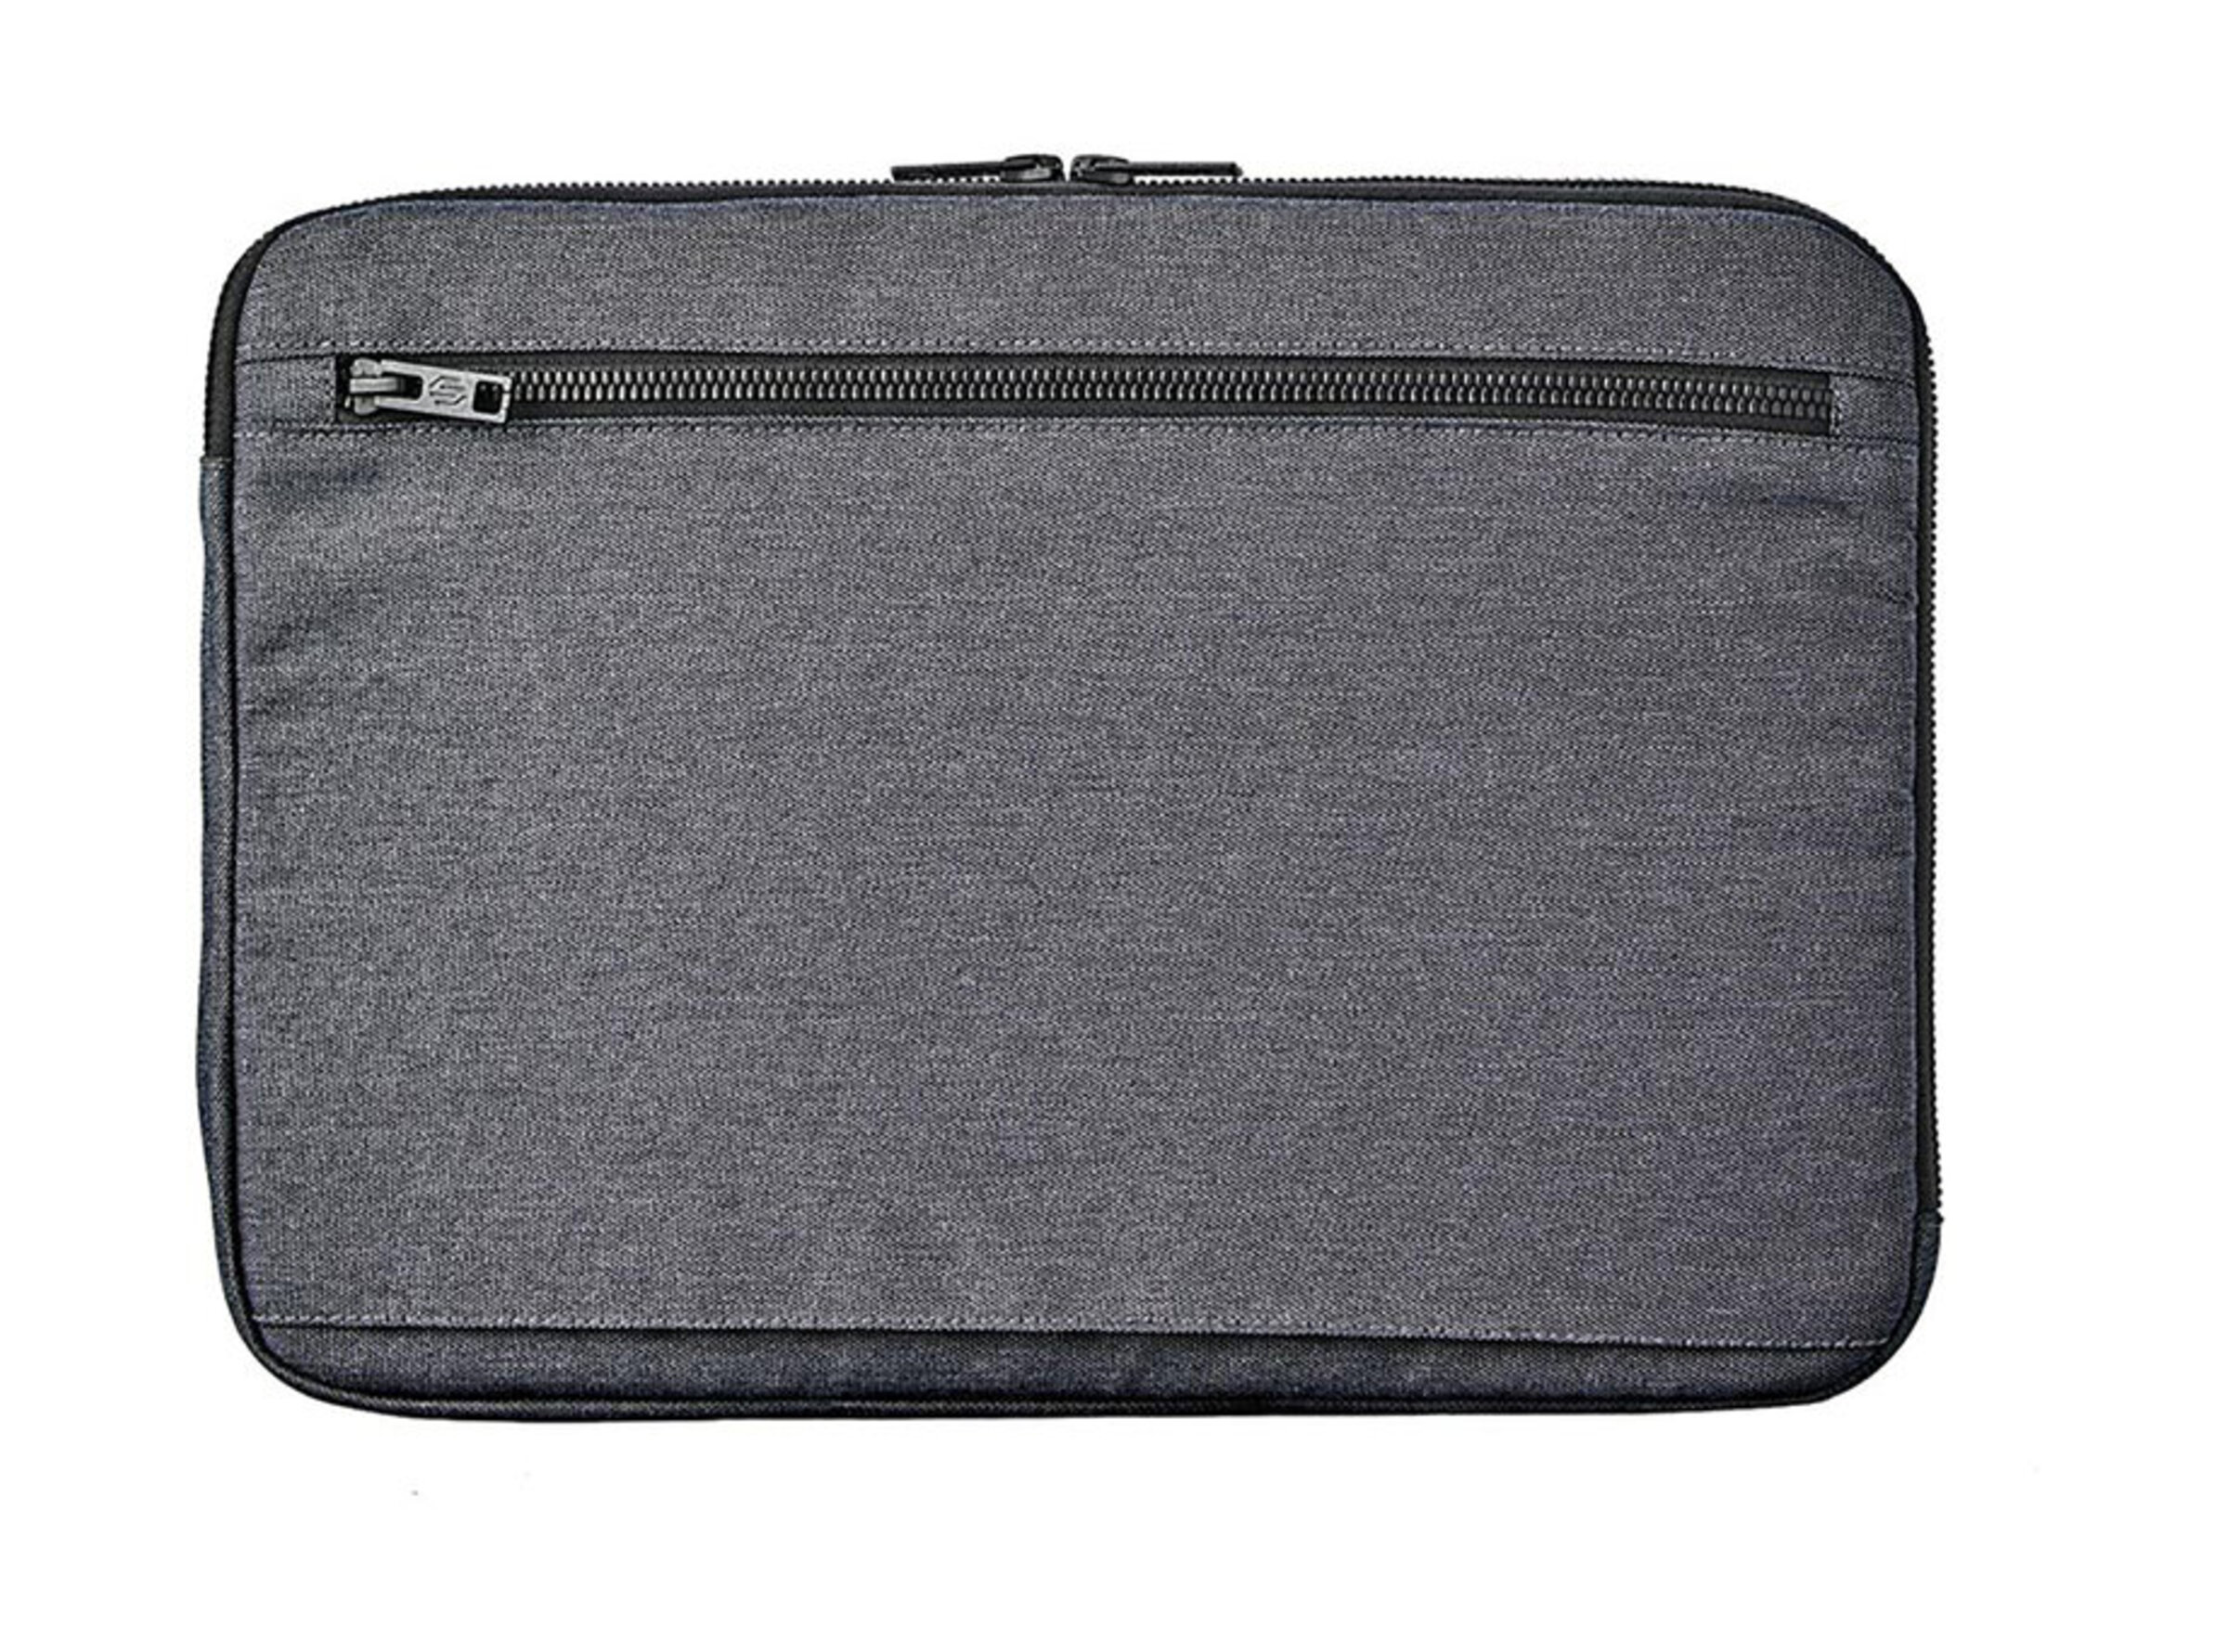 Stormtech Cupertino Laptop Sleeve 16 - Carbon - One Size